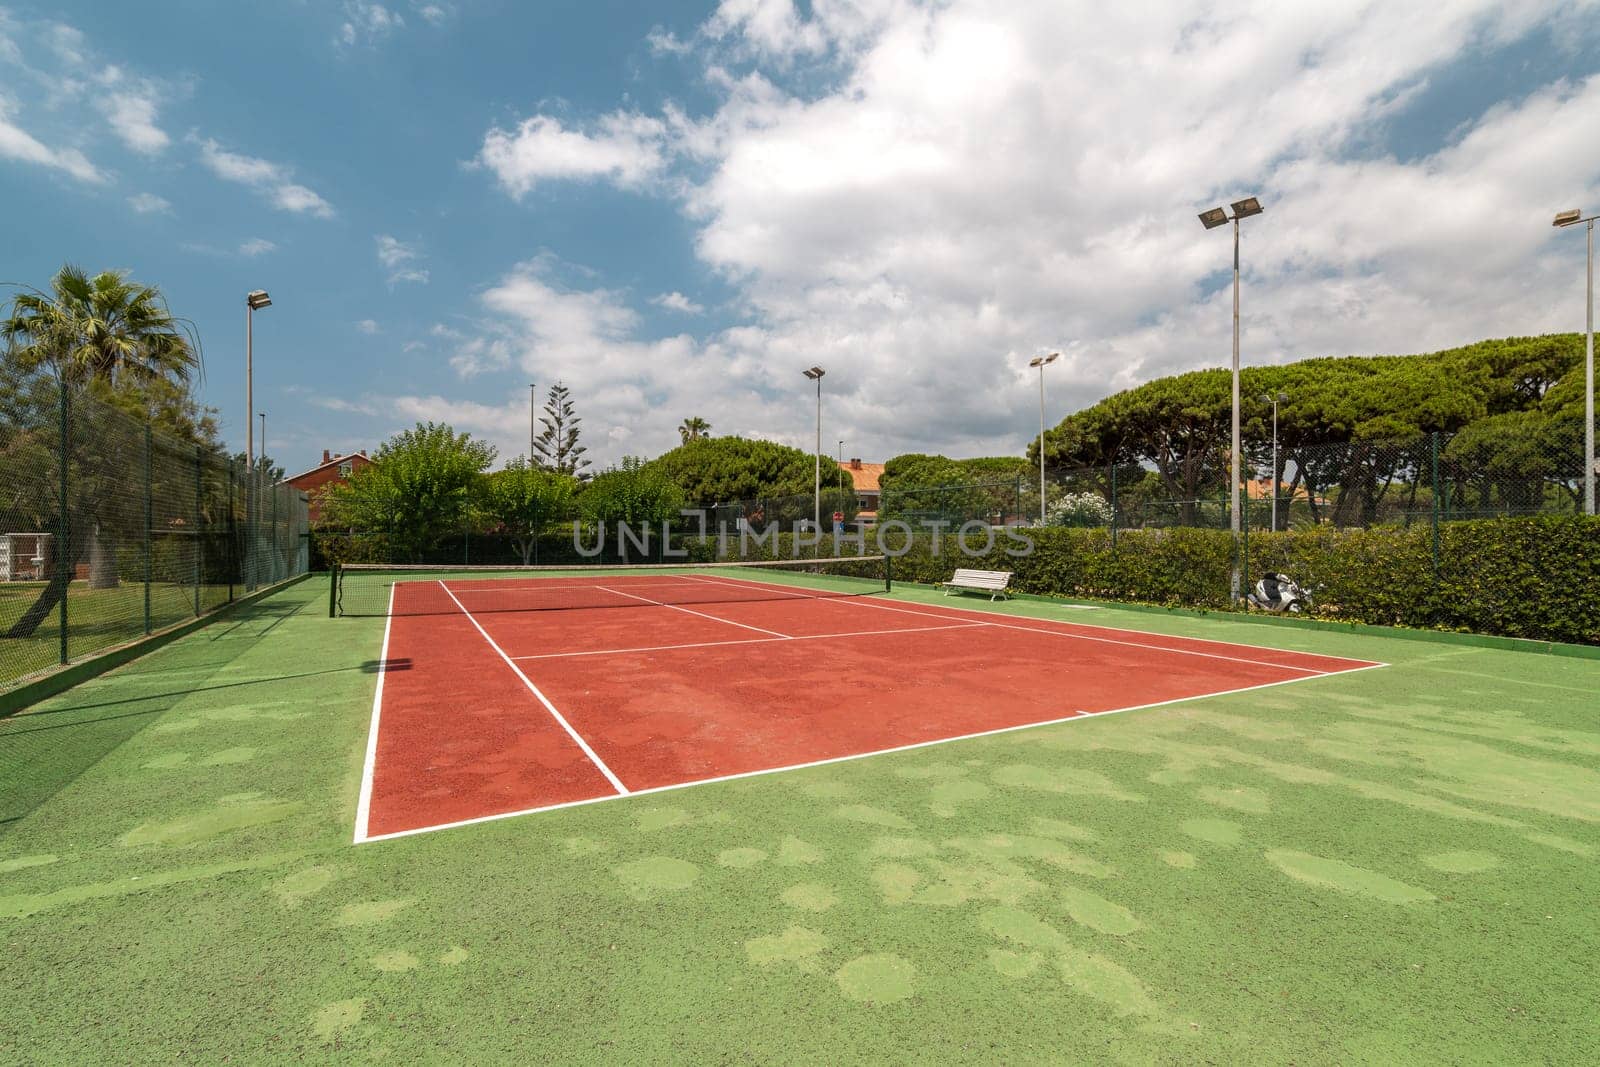 Outdoor tennis court with a red playing surface and surrounded by greenery by apavlin